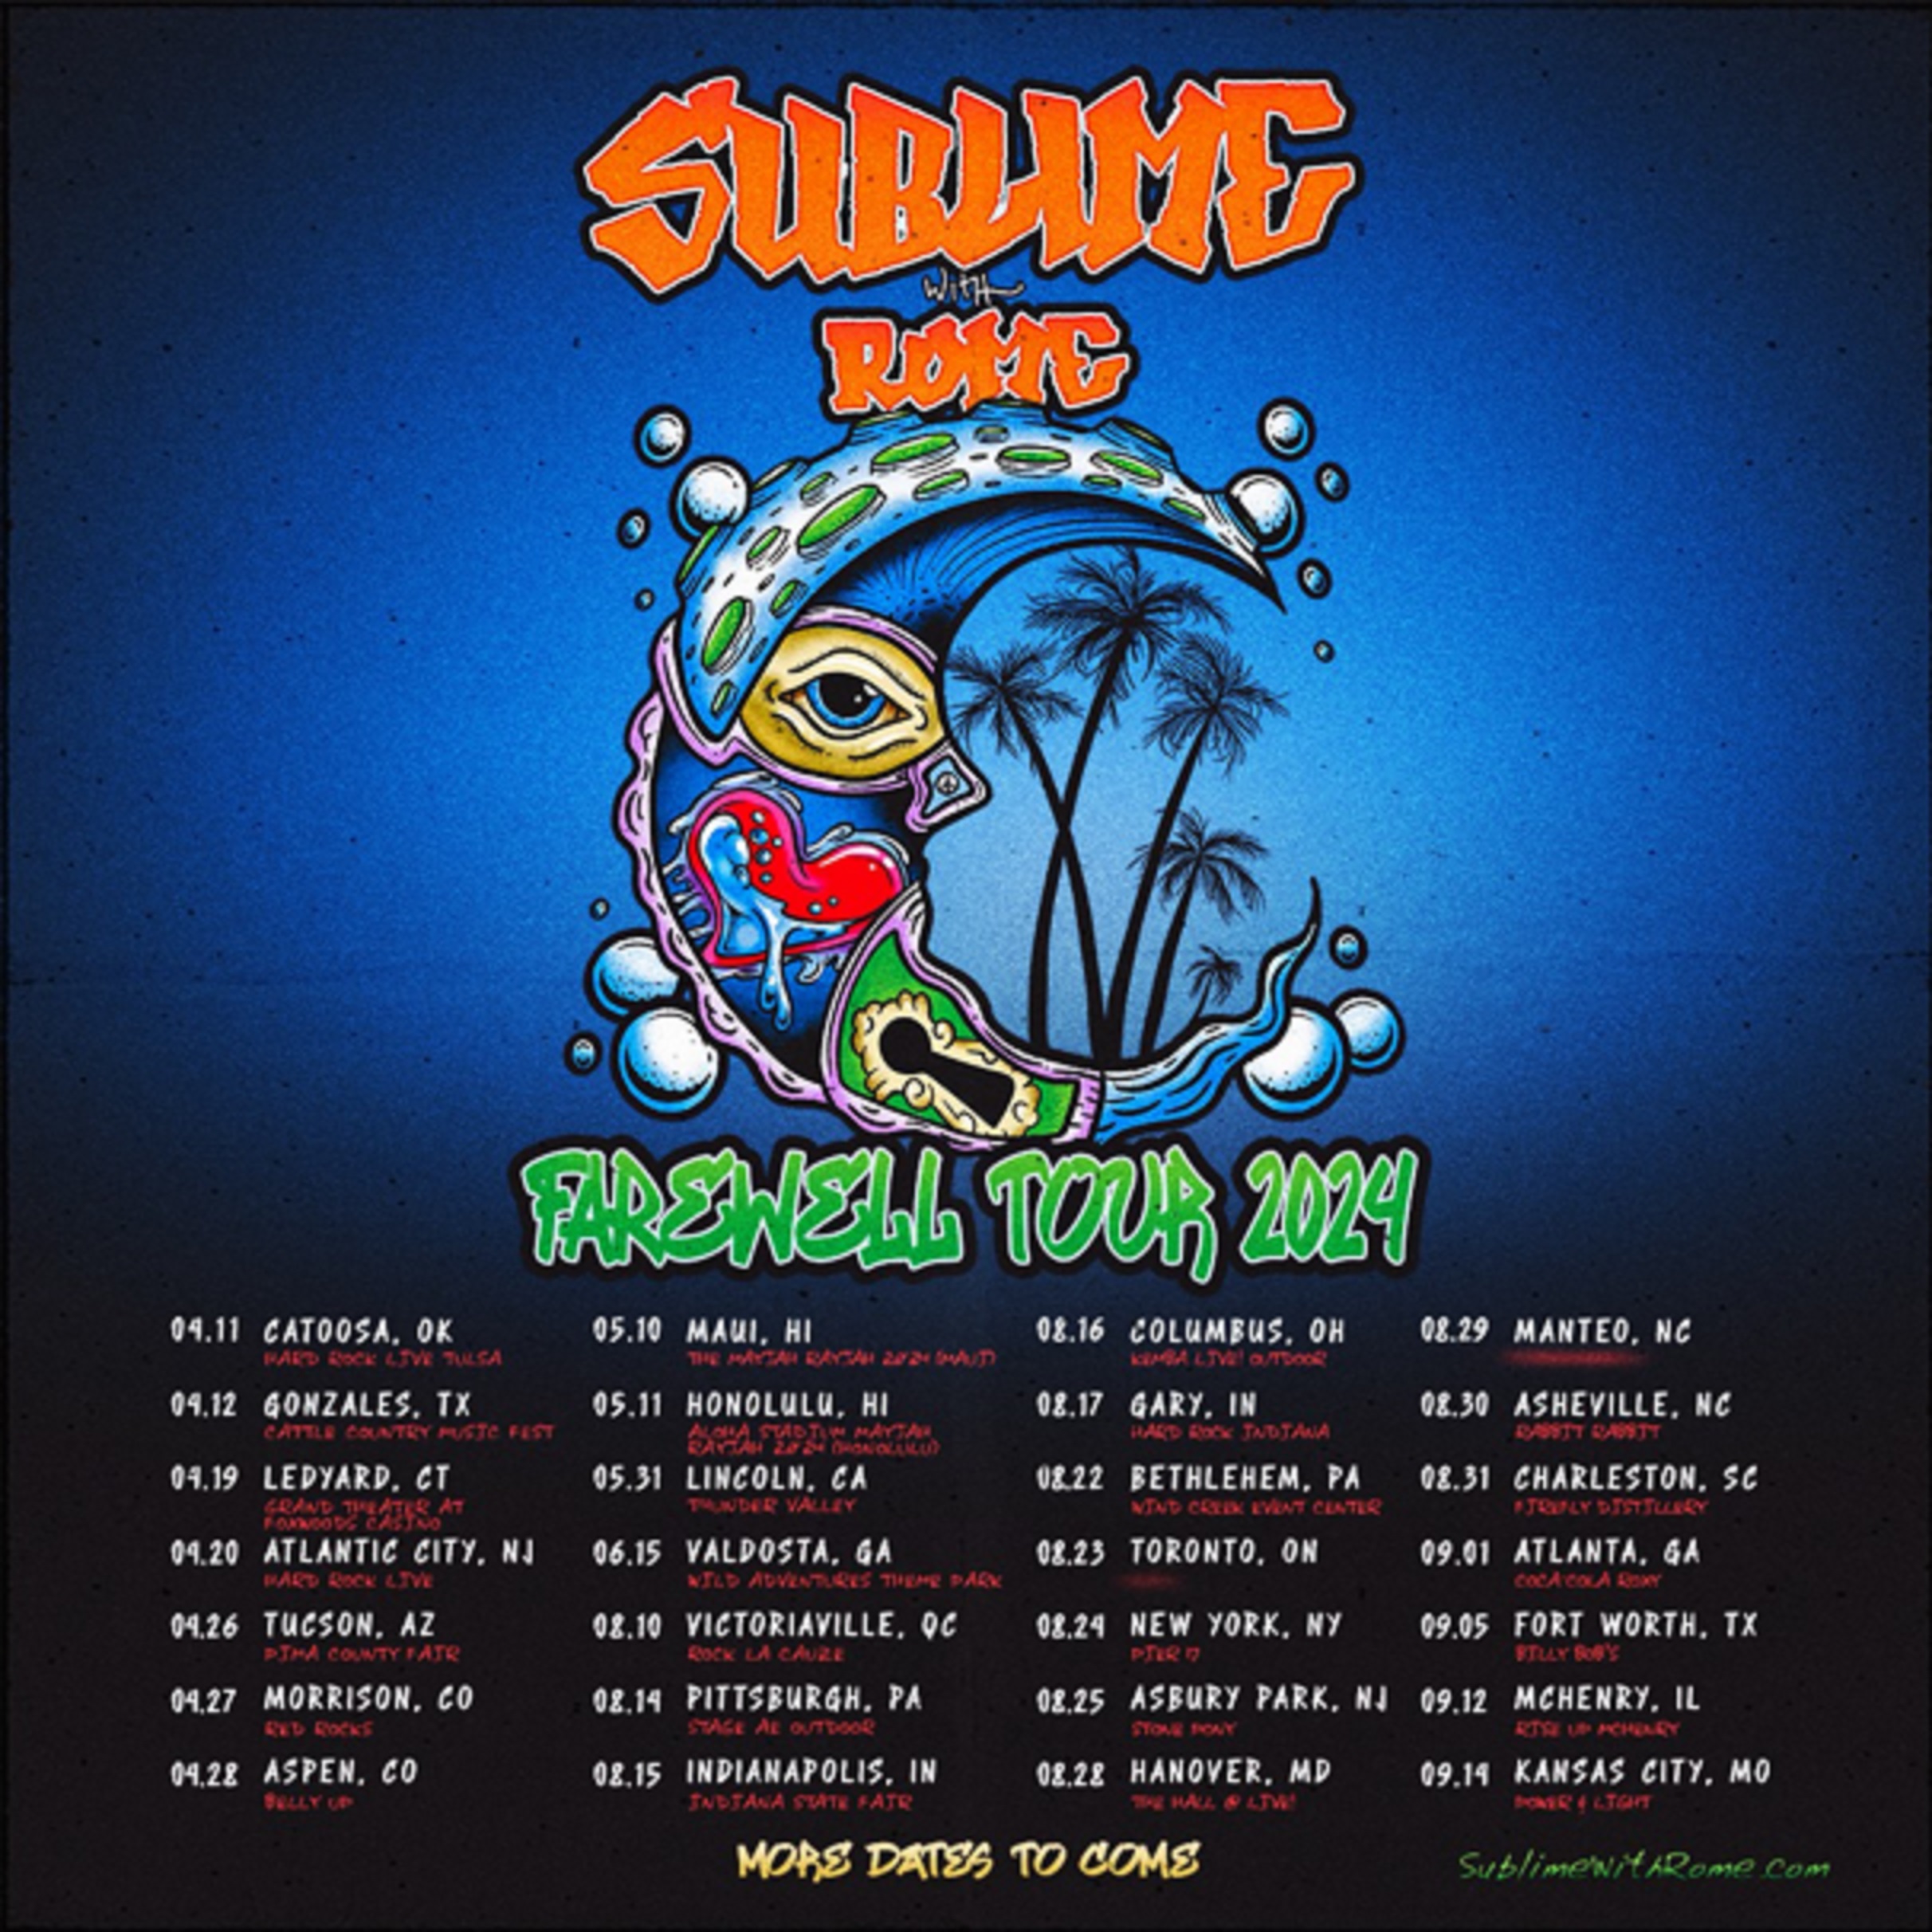 SUBLIME WITH ROME Announces The Farewell Tour